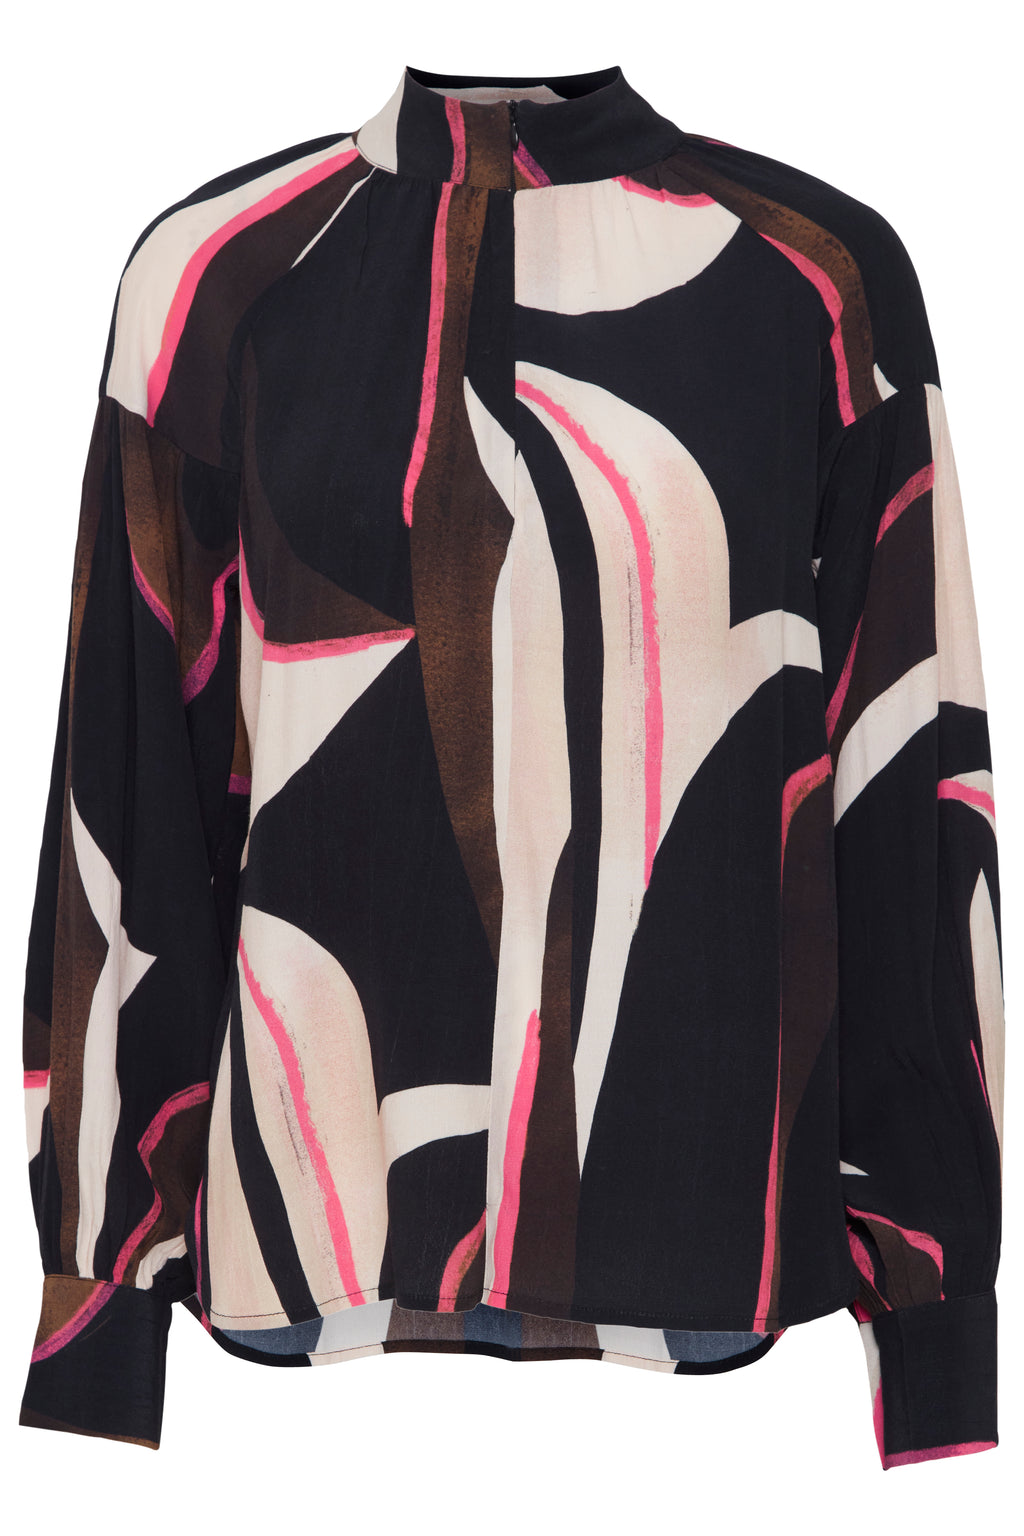 Fransa Frlena Navy Blazer/Pink Abstract Printed – Blouse, 20613285 Ruby 67 Boutique